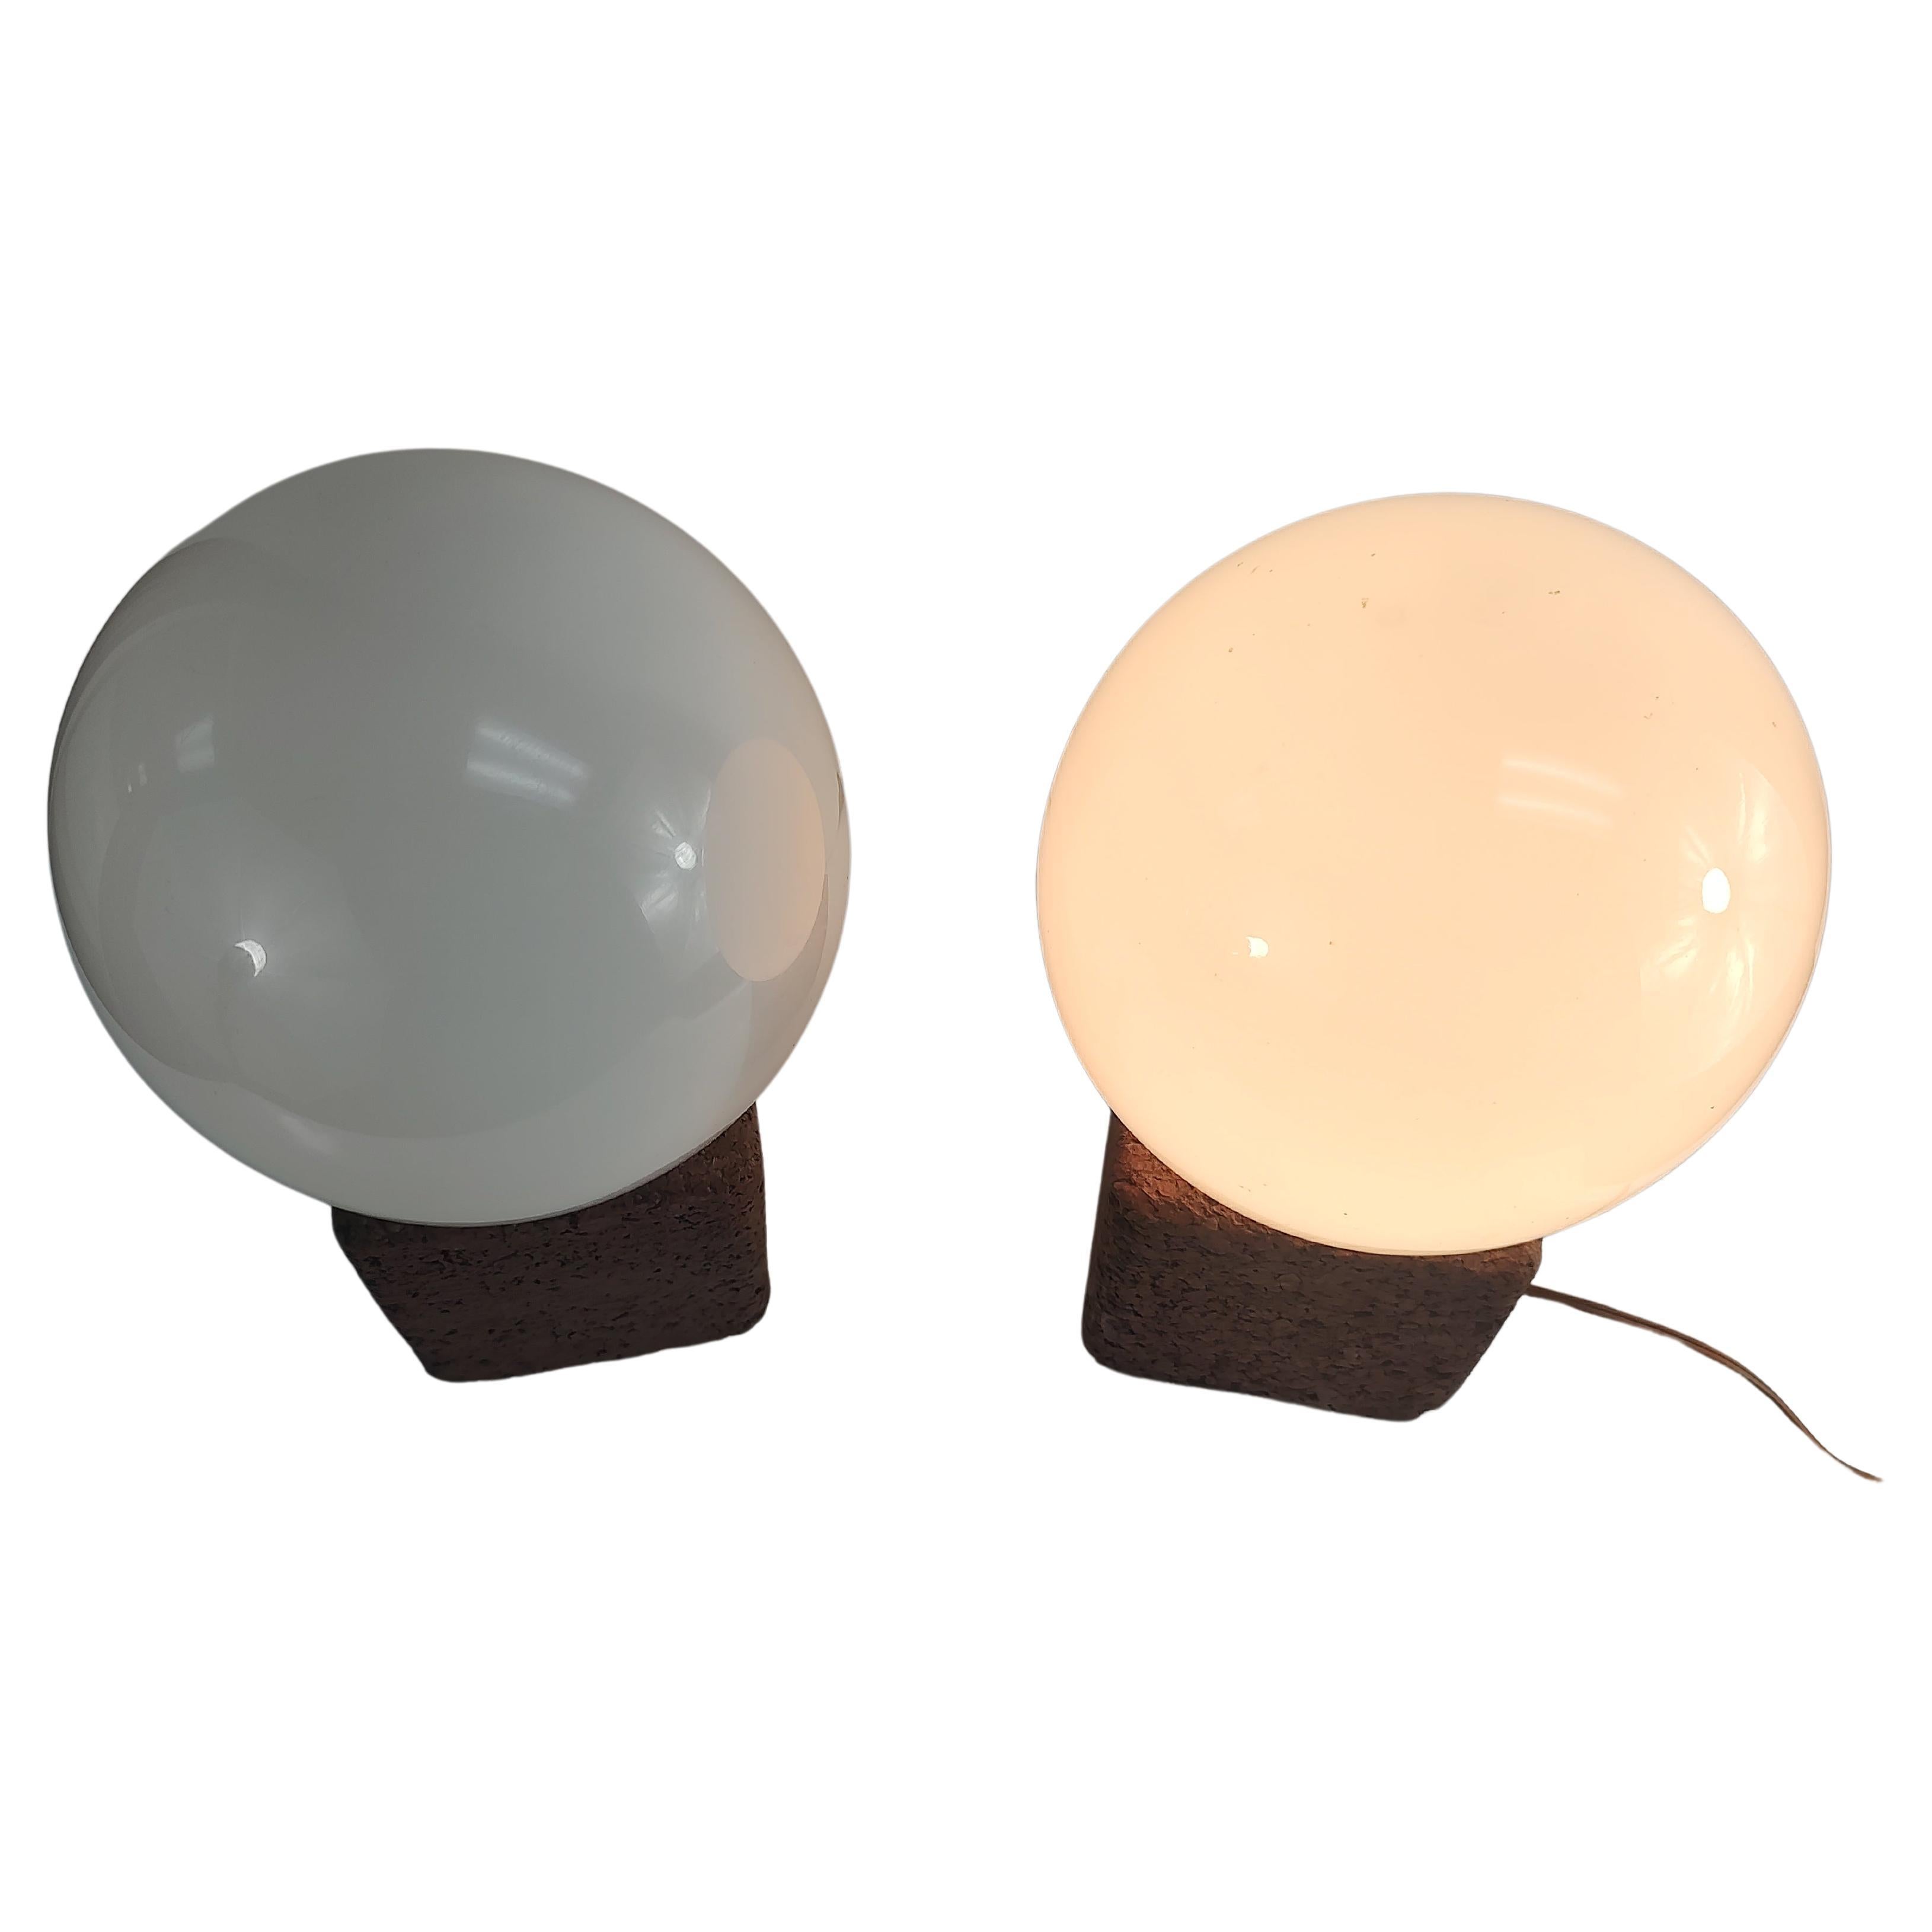 Fantastic pair of mid century modern table lamps with solid cork bases and milk Glass globes shades.  In original condition with normal wear.  Inline switches on cords. 